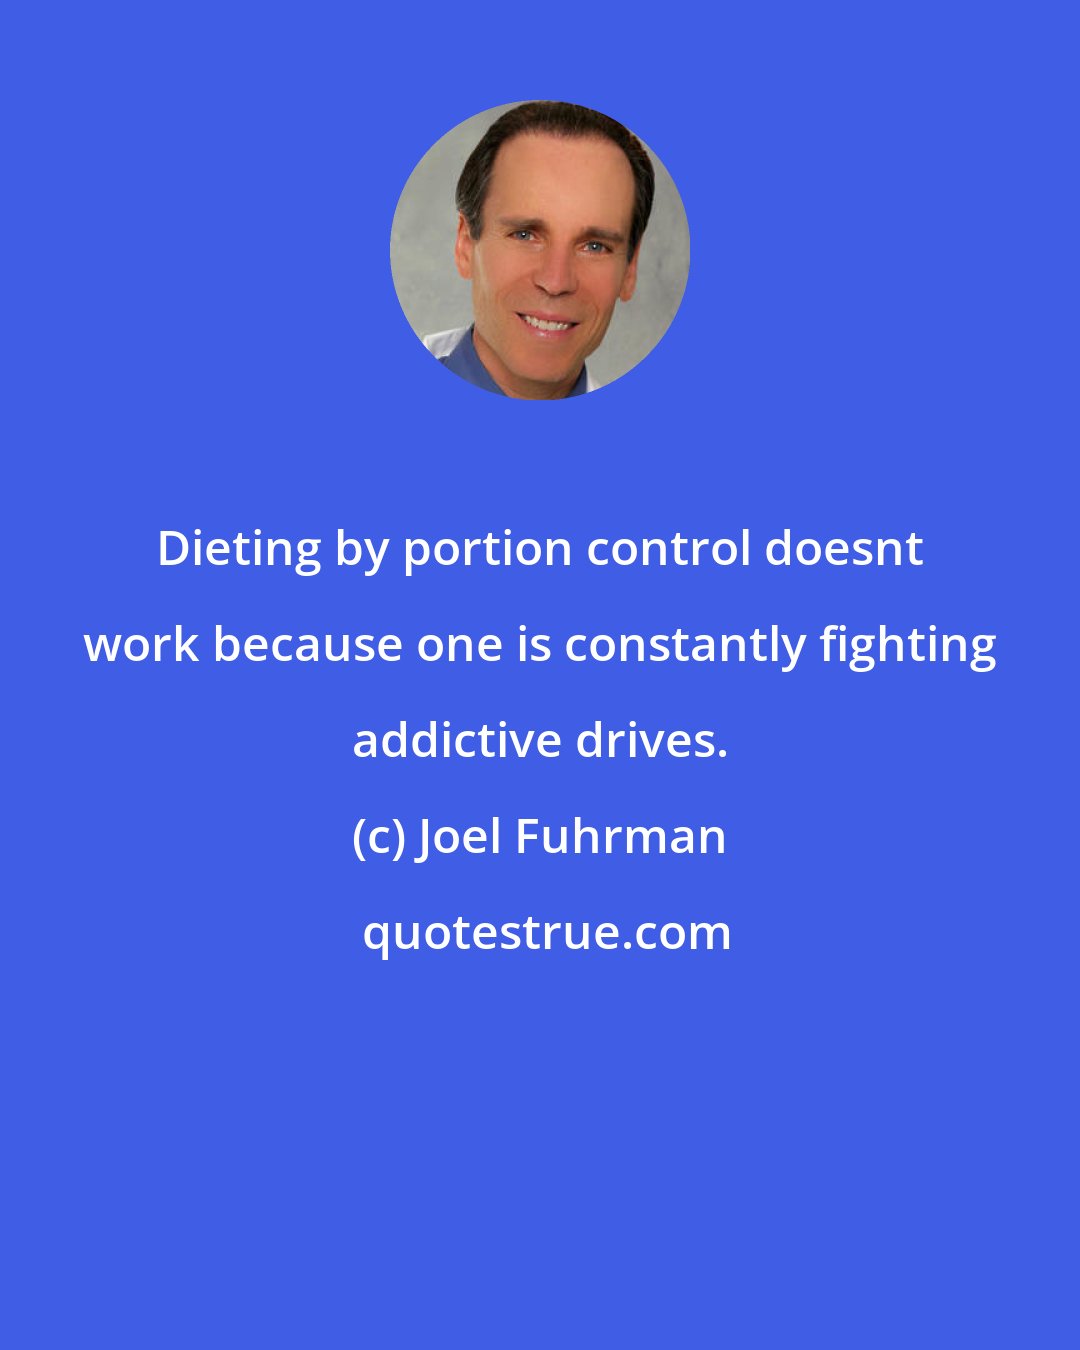 Joel Fuhrman: Dieting by portion control doesnt work because one is constantly fighting addictive drives.